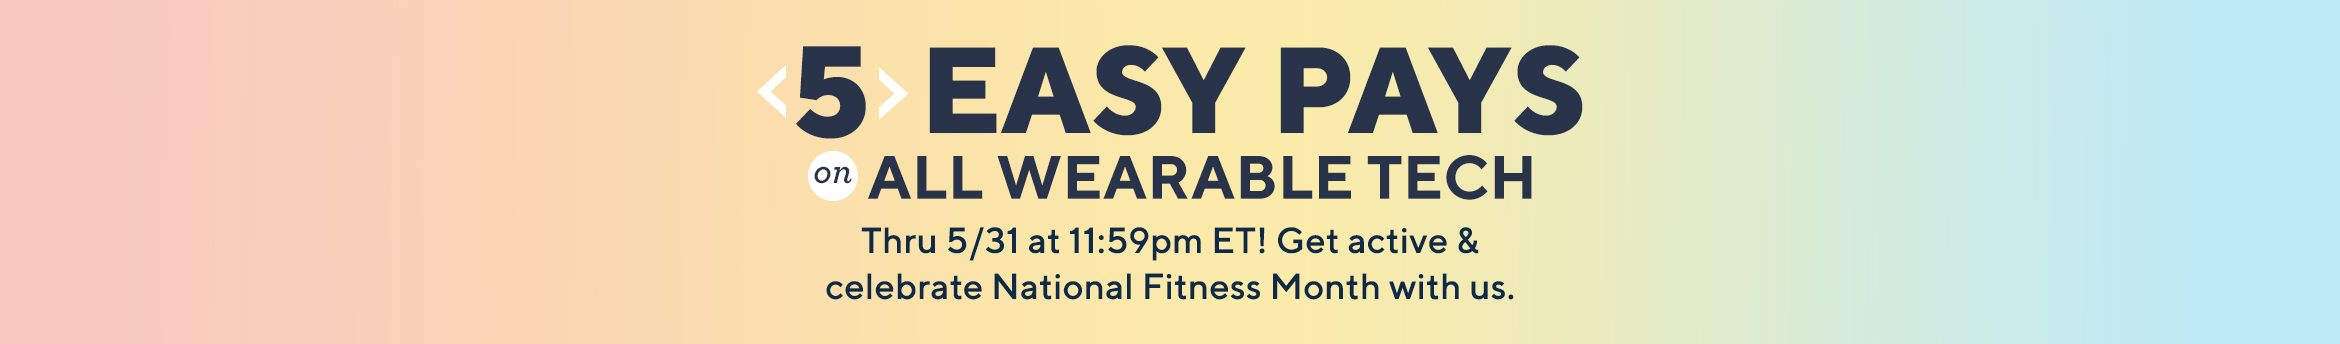 5 Easy Pays on All Wearable Tech.  Thru 5/31 at 11:59pm ET! Get active & celebrate National Fitness Month with us.